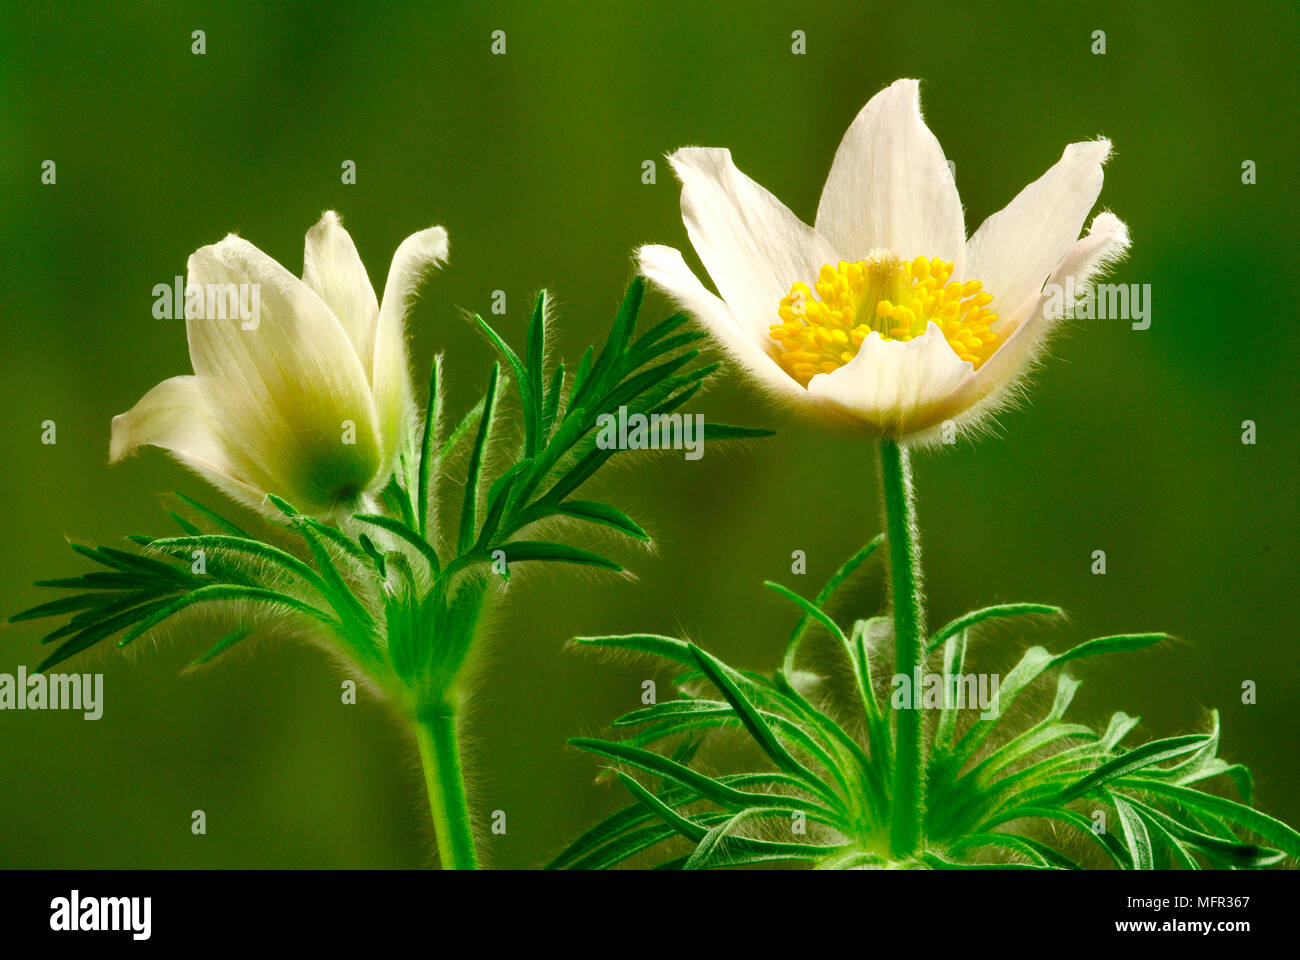 White pulsatilla with silky grey-green foliage growing in a spring garden. The flowers are later followed by spherical silvery seedheads. Stock Photo